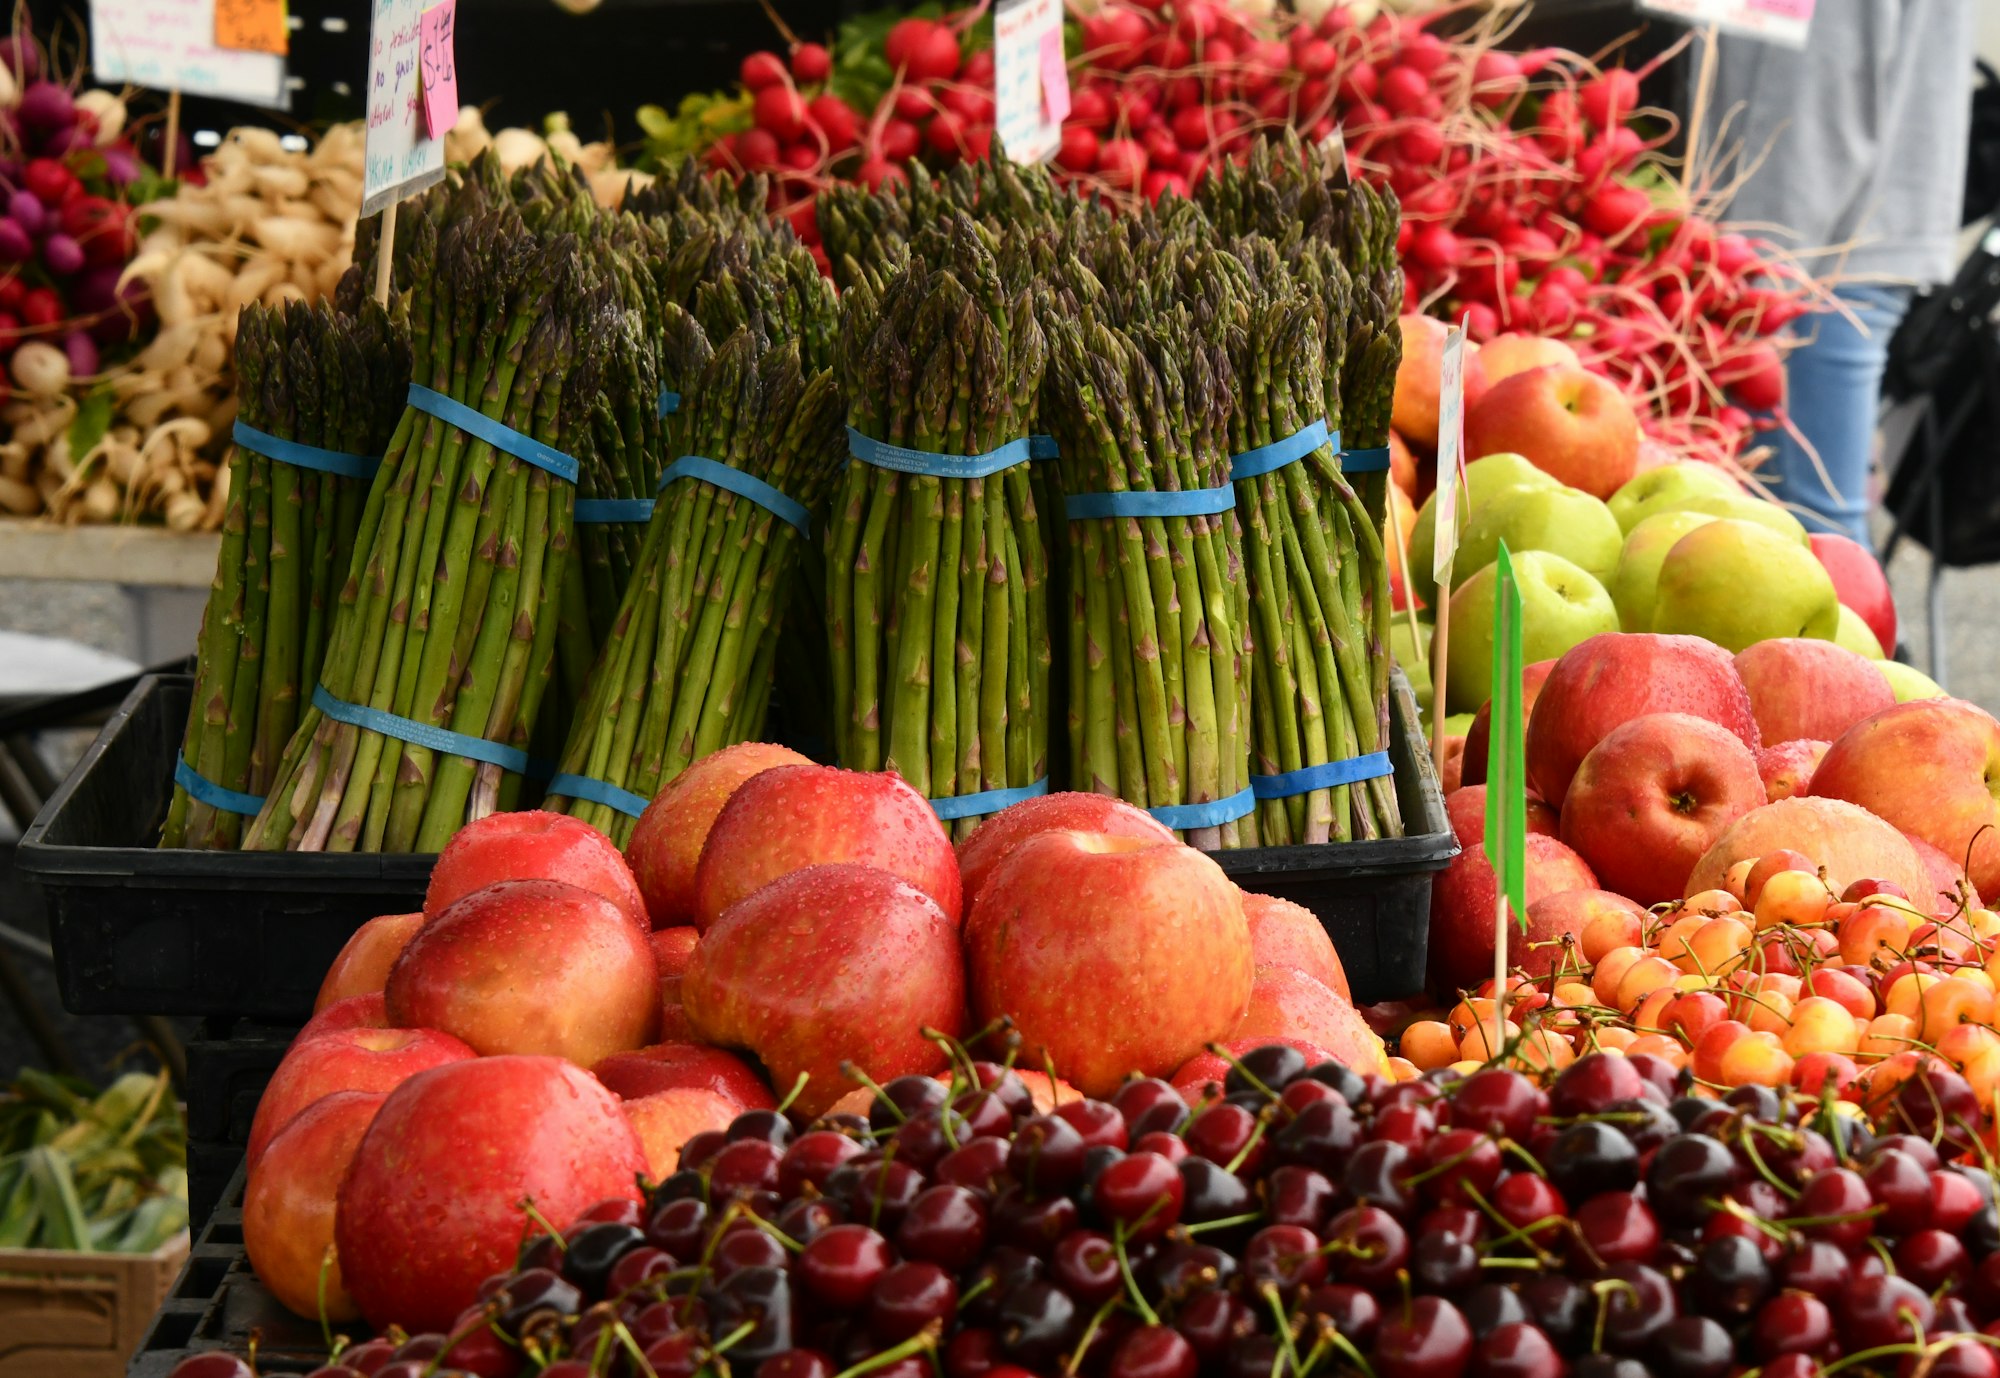 Federal Way Farmers Market is officially open for the season!